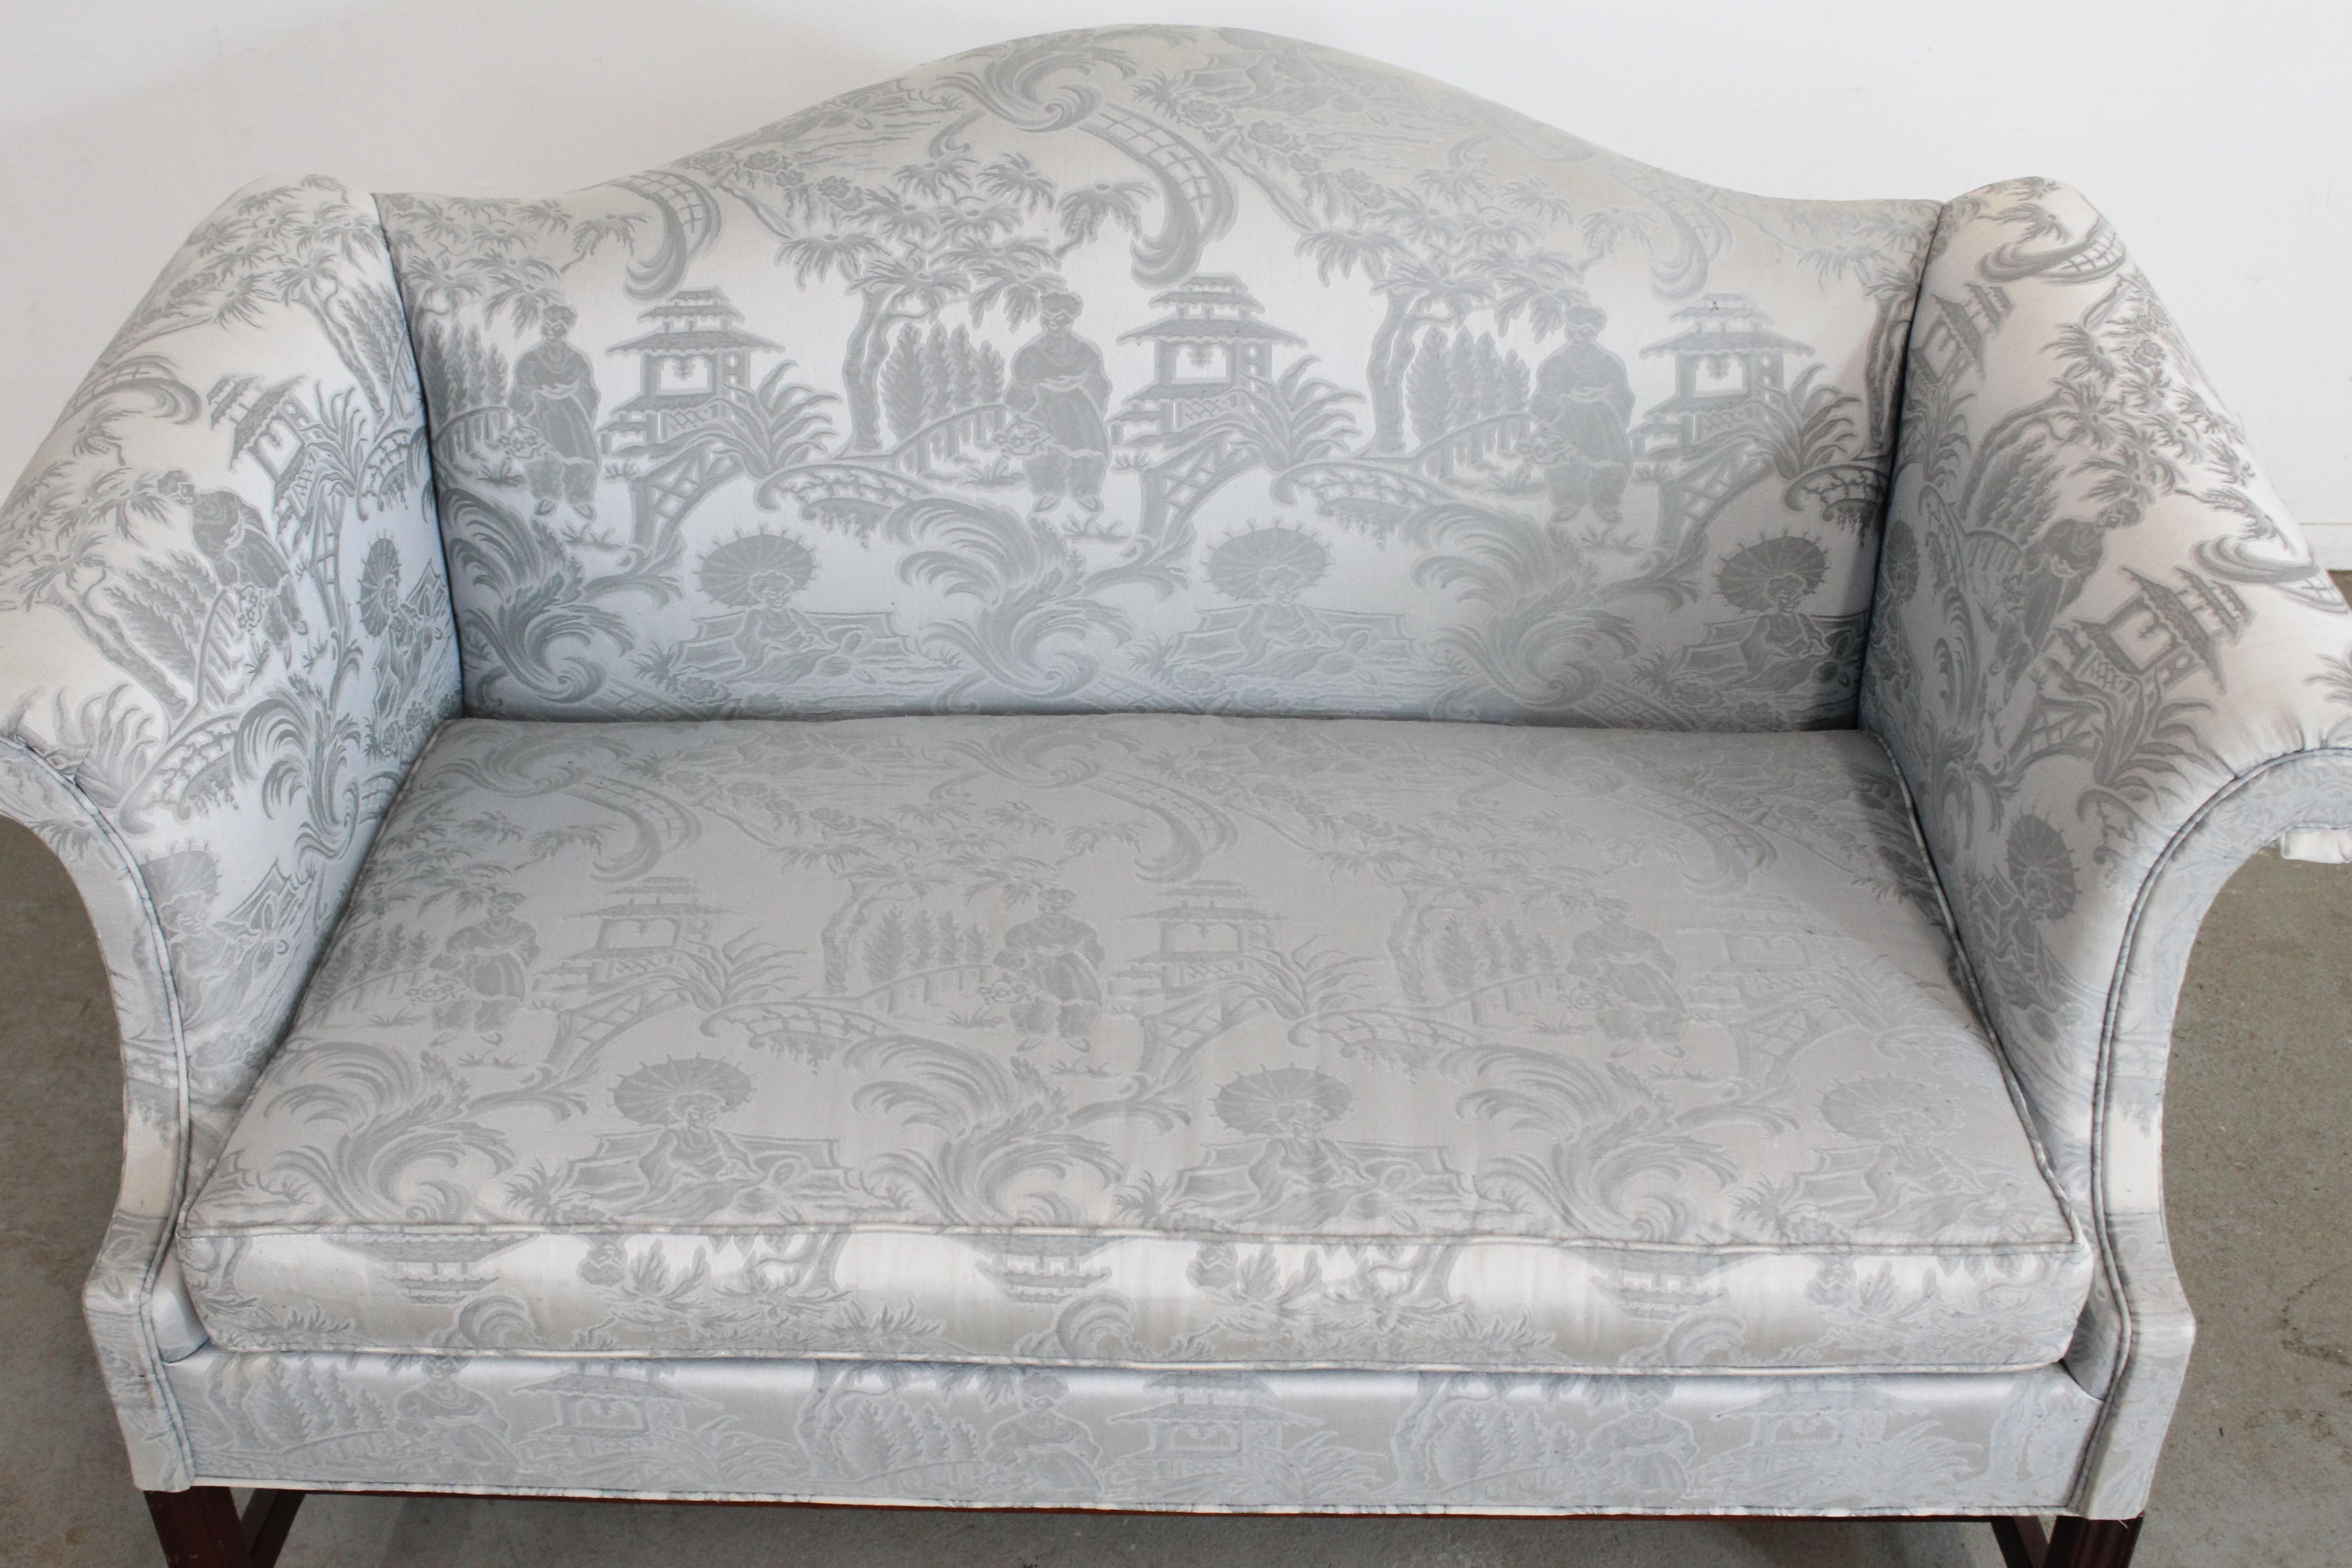 20th Century Vintage Chippendale Chinese Camelback Love Seat/Sofa by Hickory Chair Co